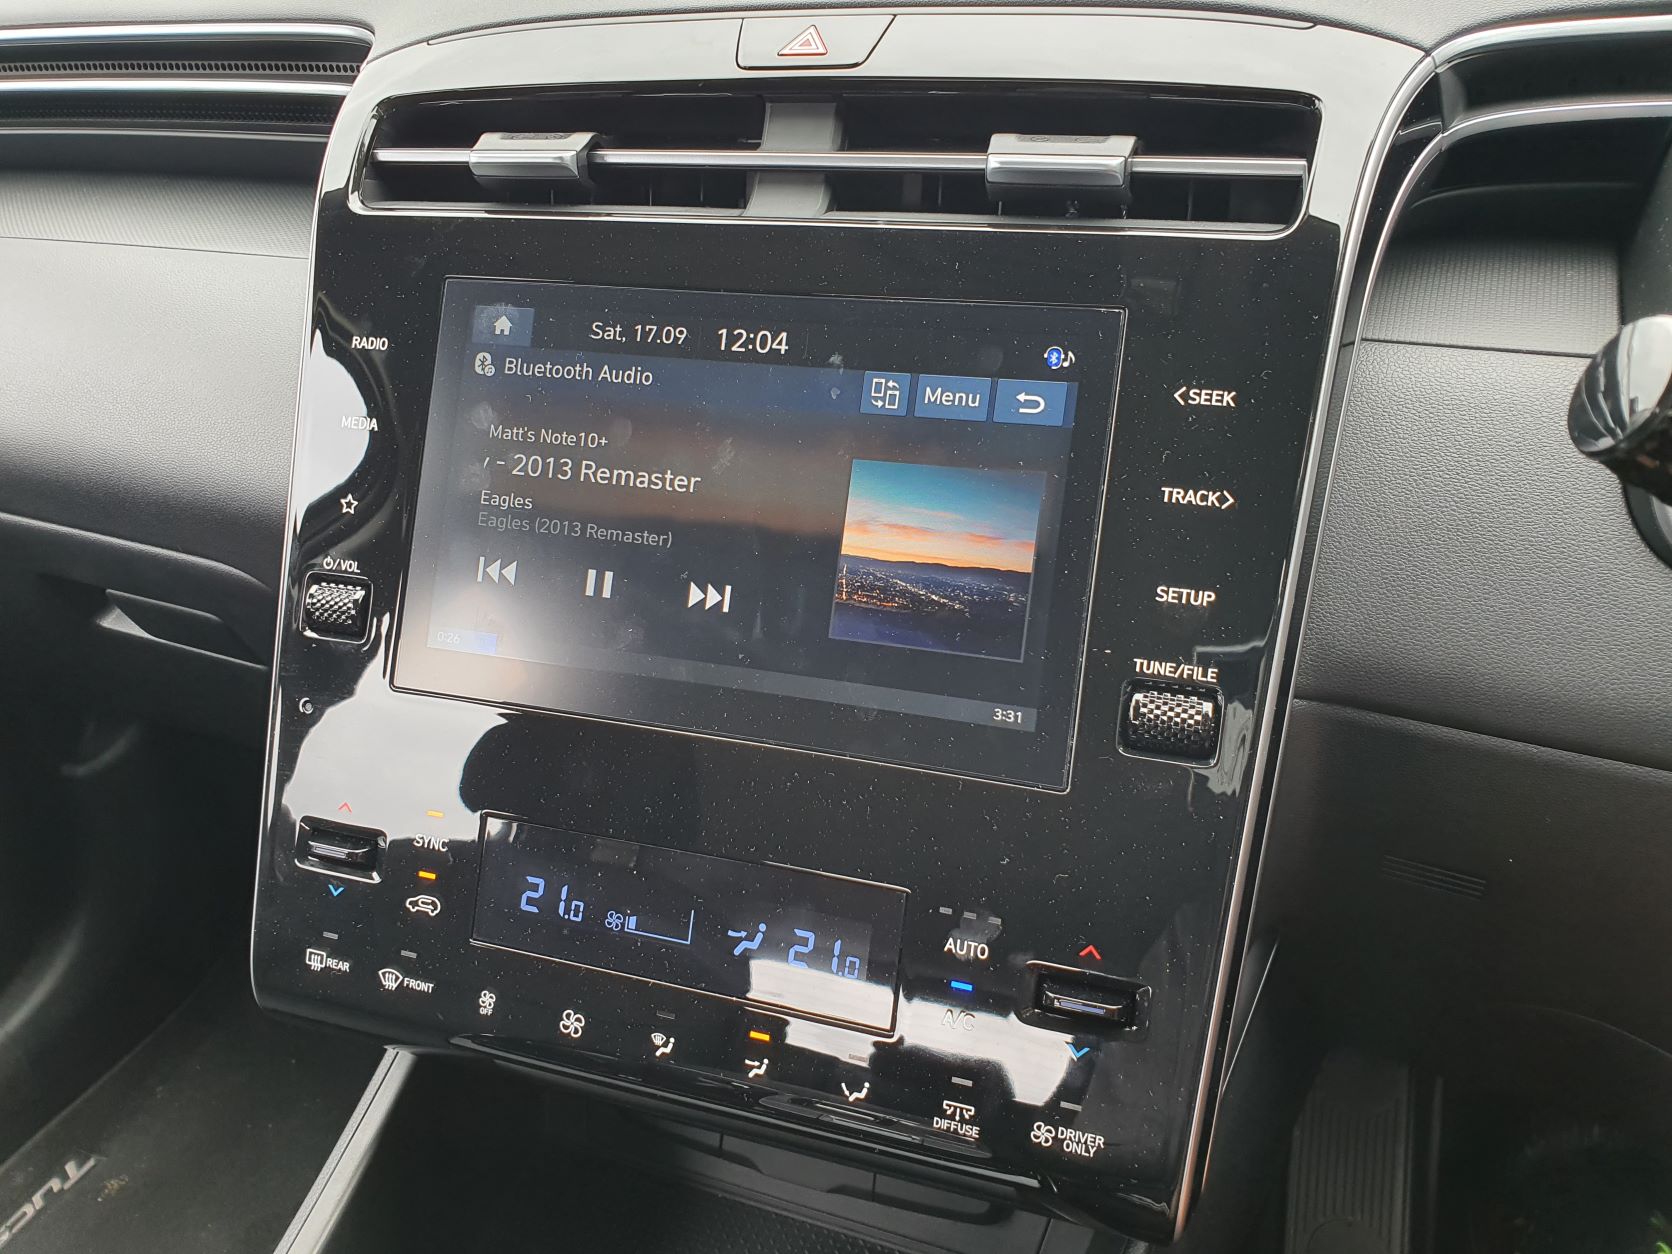 Infotainment touchscreen on the centre console of the 2022 Hyundai Tucson Hybrid